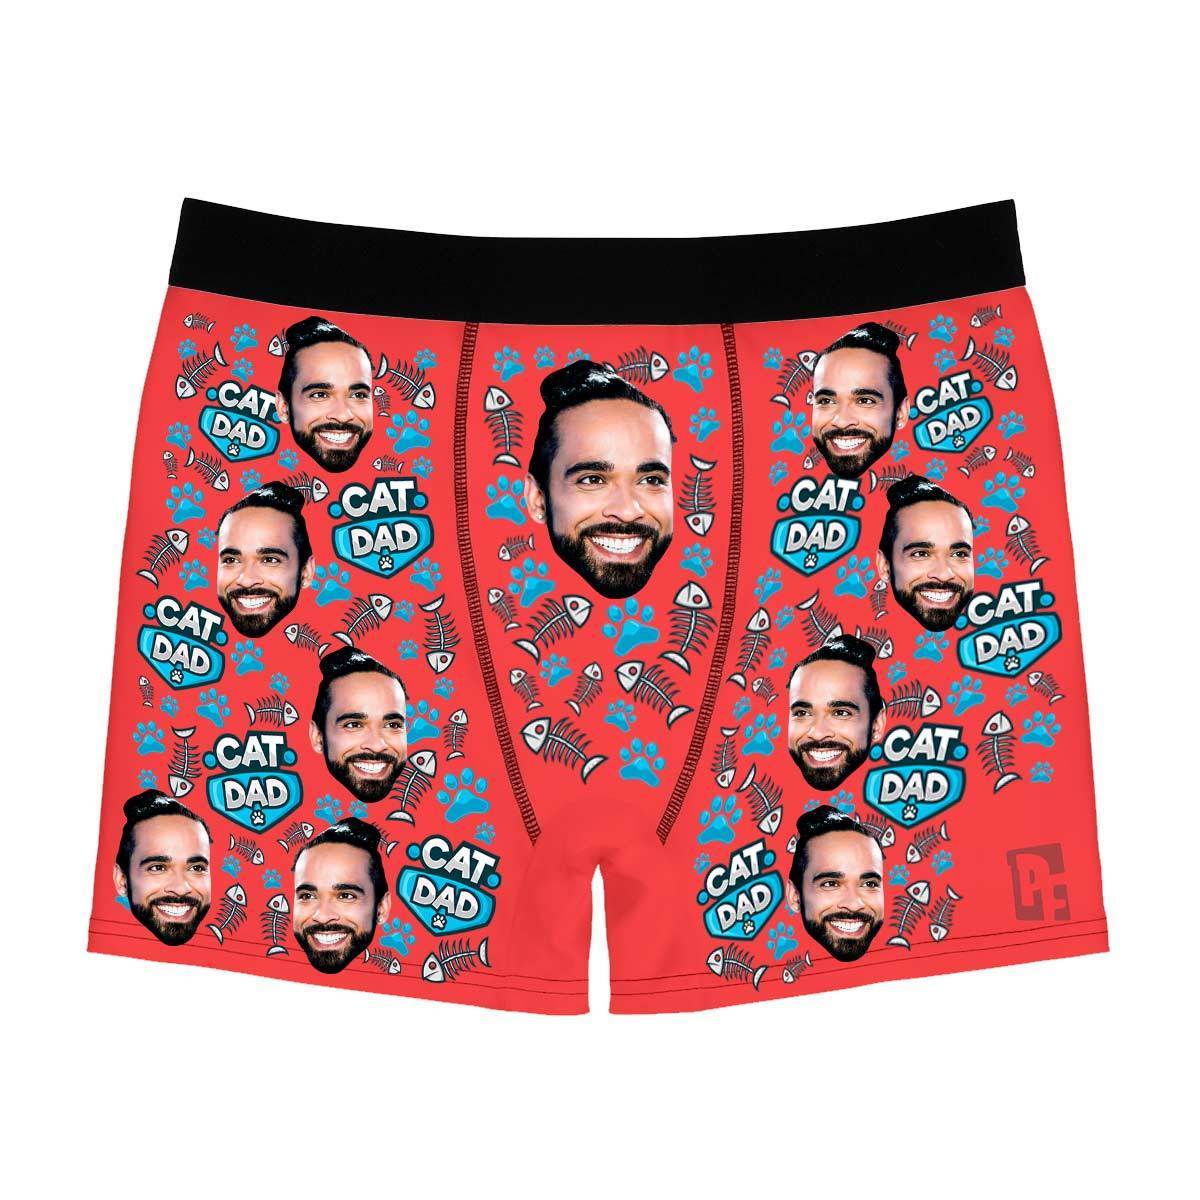 Red Cat dad men's boxer briefs personalized with photo printed on them